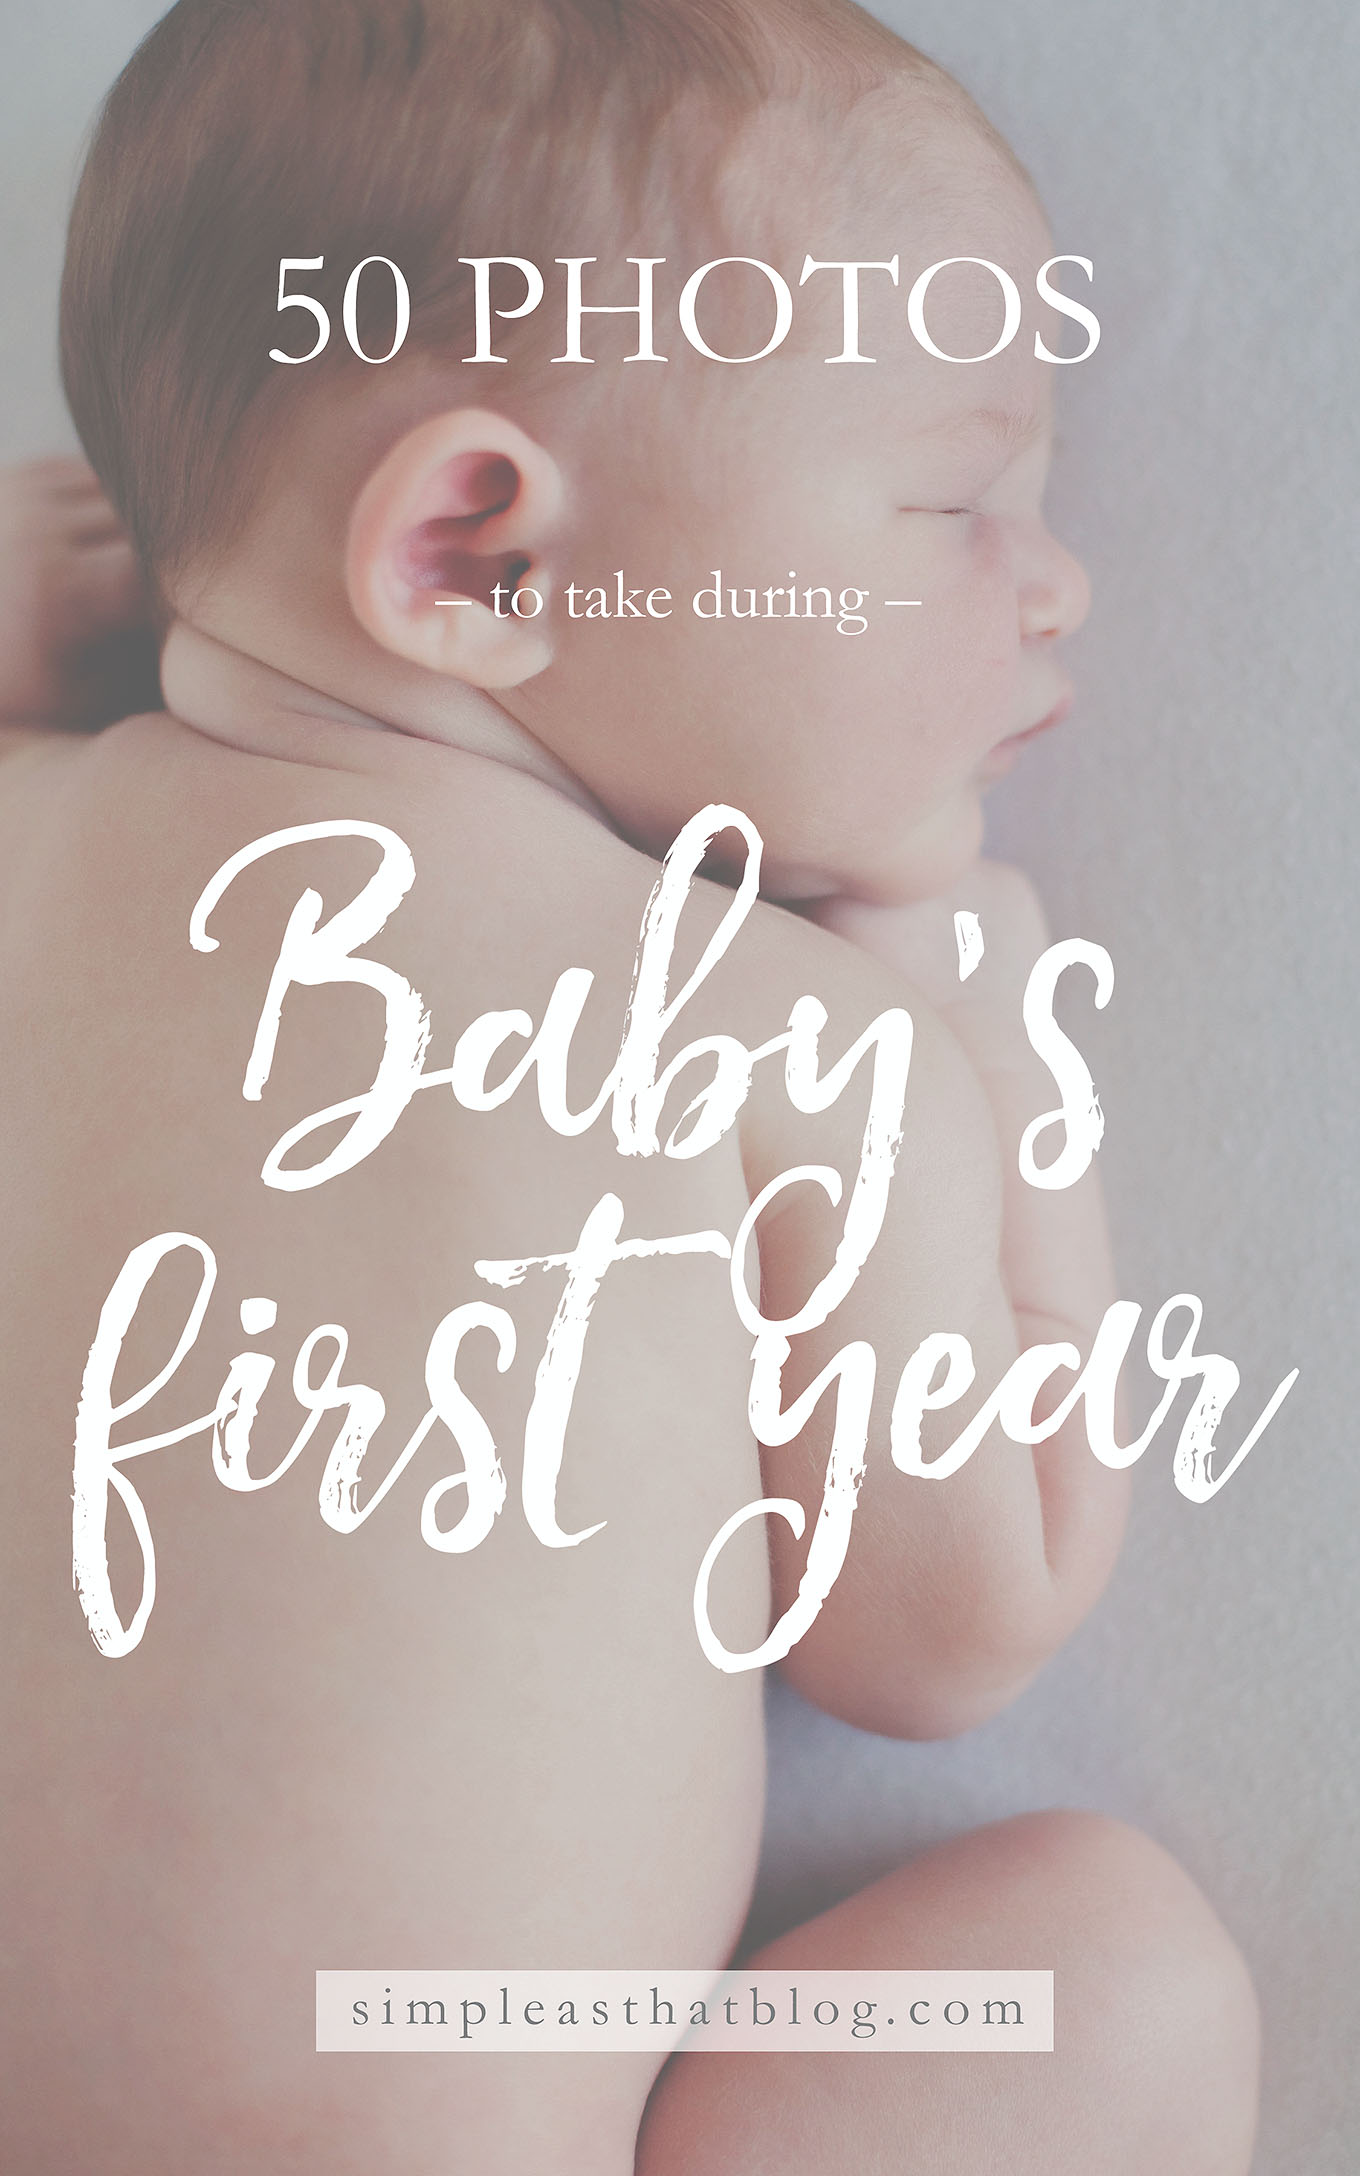 Of all the milestones we capture in our children's lives, none are quite as precious as the ones we document during their first year of life. Don't miss a single moment with this printable 50 Photos to Take During Baby's First Year checklist.